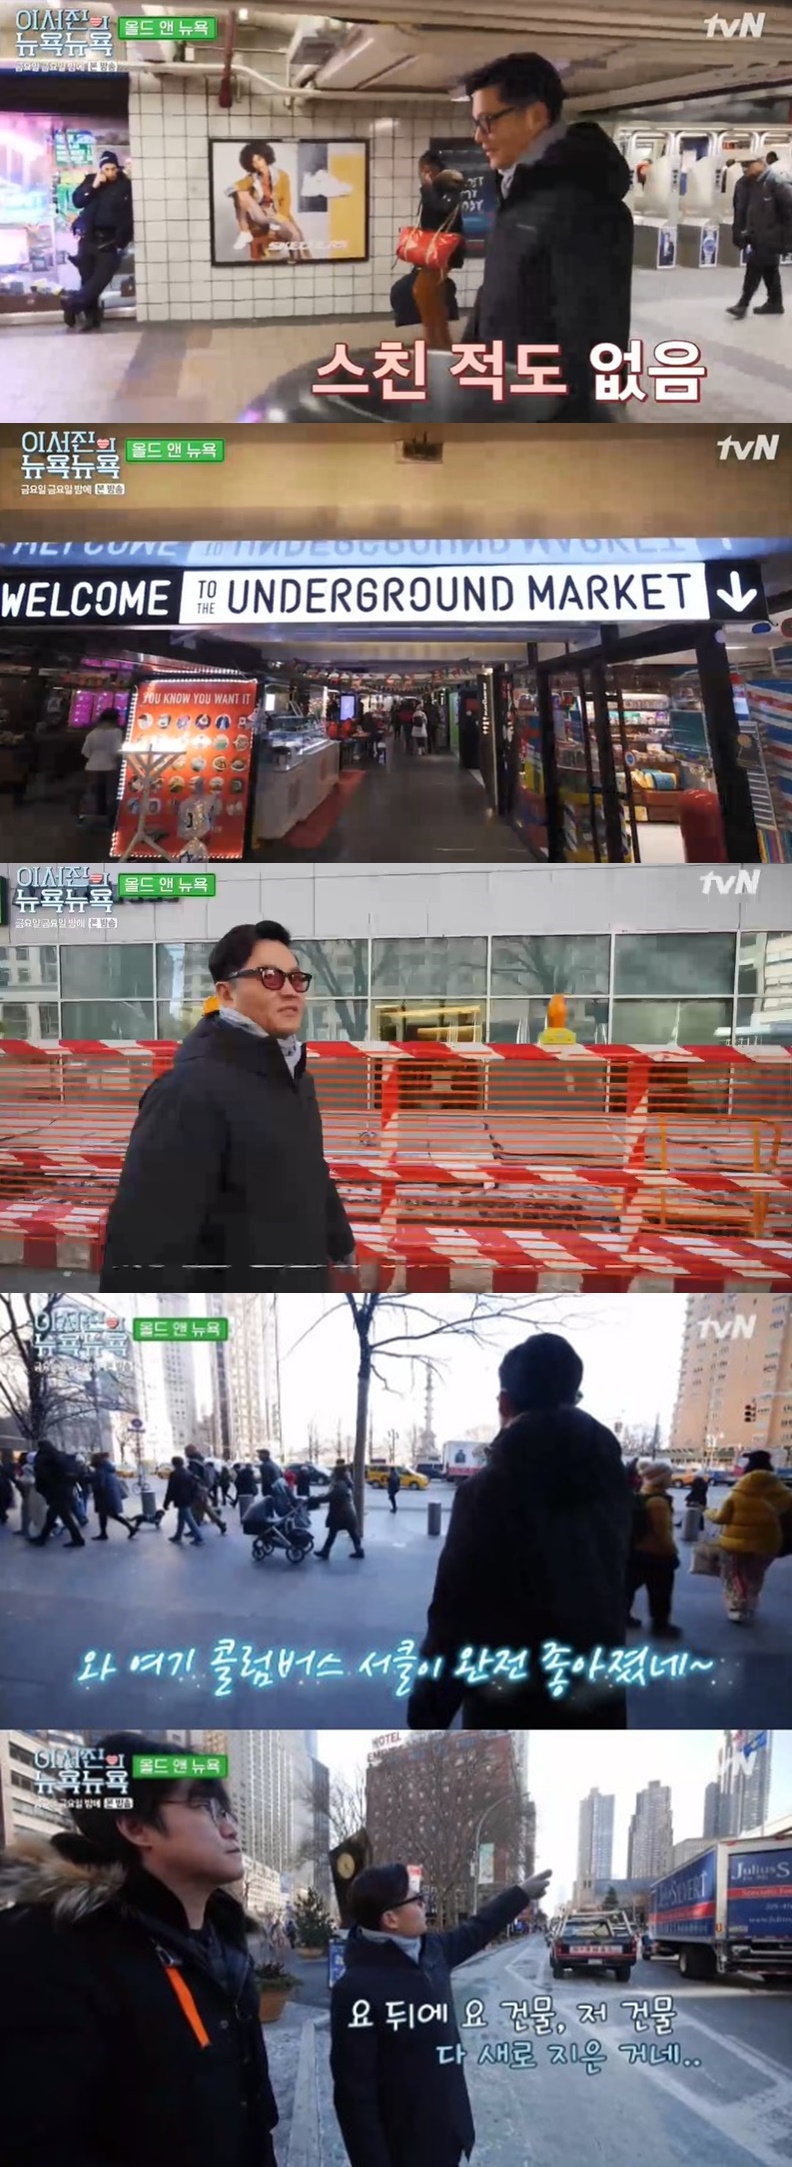 Lee Seo-jin looked bitter when he saw the changed New York City in Friday night.Lee Seo-jin went to the Juilliard music scene where he had childhood memories at the corner of Old and New York City on Friday night, a TVN entertainment program broadcast on the 20th.Lee Seo-jin, who was going to Lincoln Center, said, At that time, I went there for an hour or two. I just played for an hour.There was a movie called LD, and it came out before DVD, and there was an LD player. I listened to music almost in my twenties, he said.Lee Seo-jin, who saw an underground shopping mall inside Columbus Circle Station, admired it as I am completely better here, I think it is built here.Lee Seo-jin, who saw Columbus Circle, said, This square is circular, so it is called circle. There are many new buildings.It was a bad neighborhood here, but the neighborhood really got better. Lee Seo-jin added, What hasnt changed since 30 years ago is that its under construction every day.I think weve built a new building, too, and it wasnt so pretty in the old days, said Lee Seo-jin, who arrived at Juilliard School, just next to Lincoln Center.Lee Seo-jin looked bitter when he confirmed that there was another store in the memorable music store.In the section of Factory of Experience Life, Lee Seung-gi, who was found in the LP version Factory, was drawn.Lee Seung-gi, who showed a special excitement before going to the LP version Factory, said, I wanted to have this once when I released the album.Lee Seung-gi, who met Baek Hee-sung, the only LP engineer in Korea, learned to make a sound bone on the original plate.Lee Seung-gi said, I made an album, but I first knew that there was only one person who made an LP version. He confessed that he wanted to become a homemade person and laughed.As for the LP plate sound machine, Baek Hee-sung said, I needed a sound machine to make an LPG plate, but there was only one in Korea.So I went to him and persuaded him. He explained, It is a principle that sounds in a place thinner than a head. Lee Seung-gi, when he heard his songs on the LP edition, said, The LPG version has a singers voice in front of him and the background sound is located behind him.Lee Seung-gi, who went directly to Factory to make an LP version containing various representative songs such as My Girl, was delighted that he was my LP version.Lee Seung-gi, who watched Lee Seung-gis special LP first edition, enjoyed the pleasure of signing.Unlike expectations, making LP editions was not easy; each time the LP version was taken out, it had to be paid quickly, but Lee Seung-gi failed in succession and laughed.Lee Seung-gi, who made 100 editions of Lee Seung-gi Special Edition LP, did his own from inspection to packaging.Lee Seung-gi, who coveted the first edition of Lee Seung-gis LP, said, Please tell Hodong to your brother, making the surrounding area into a laughing sea.After finishing the labor, Lee Seung-gi said, Today was a gift-like time.It was small, but it was like a handmade to make one by one. He joked, I can climb the throne instead of the tax payroll. I thank the audience, he said, finishing the final Factory.Jin-kyeong Hong, who met his best friend Jo Se-ho and Nam Chang-hee, was awkward to go to his house, not to Friends house.Jin-kyeong Hong, who asked Mother to appeal to her childhood when she was interested in literature, was embarrassed to tell Jo Se-ho that she could see that she received the book review award.Jin-kyeong Hong Mother said, In fact, Jin-kyeong Hong liked to read books and shared them together with a lot of book reviews.Jin-kyeong Hong Mother, who revealed the story of Jin-kyeong Hong marriage behind the scenes, said, It is difficult for a young child to do it at a broadcasting station.I wanted to marry him, but there were many times when I had a dinner, so I had a hard time with Husband. He came home after the day of marriage and we called him.We heard the Feelings of liberation, and we had no regrets. Jin-kyung, who had been on her honeymoon later, asked, Did you feel sorry?But I lied because I cried. Jo Se-ho, who tasted the Jin-kyeong Hong Mother table built-in soup, which is a good product of ginger and radishes after finishing the talk, was impressed.Jin-kyeong Hong Mother caught the eye by saying it was important to put Cheongyang red pepper powder in the marinade.Jin-kyeong Hong Mother was proud to see Jo Se-ho and Nam Chang-hee, who finished a bowl and ate a second bowl of gut soup.Jin-kyeong Hong, who showed his regrets for the last recording, said, I always recorded it as Feelings to play at Friends house.But we are now Na Young-seok division, he said, laughing.According to a recipe from Jin-kyeong Hong Mother, first wash the guts with flour about five times, remove impurities and then eat them in boiling water.When the bubbles come up from the gut, the fire is turned off. Mix the soup with the soup and the soup.When the marsh, garlic, house soy sauce, pepper, sesame salt, and sesame oil are added and mixed with the gut, the gut spice is made.